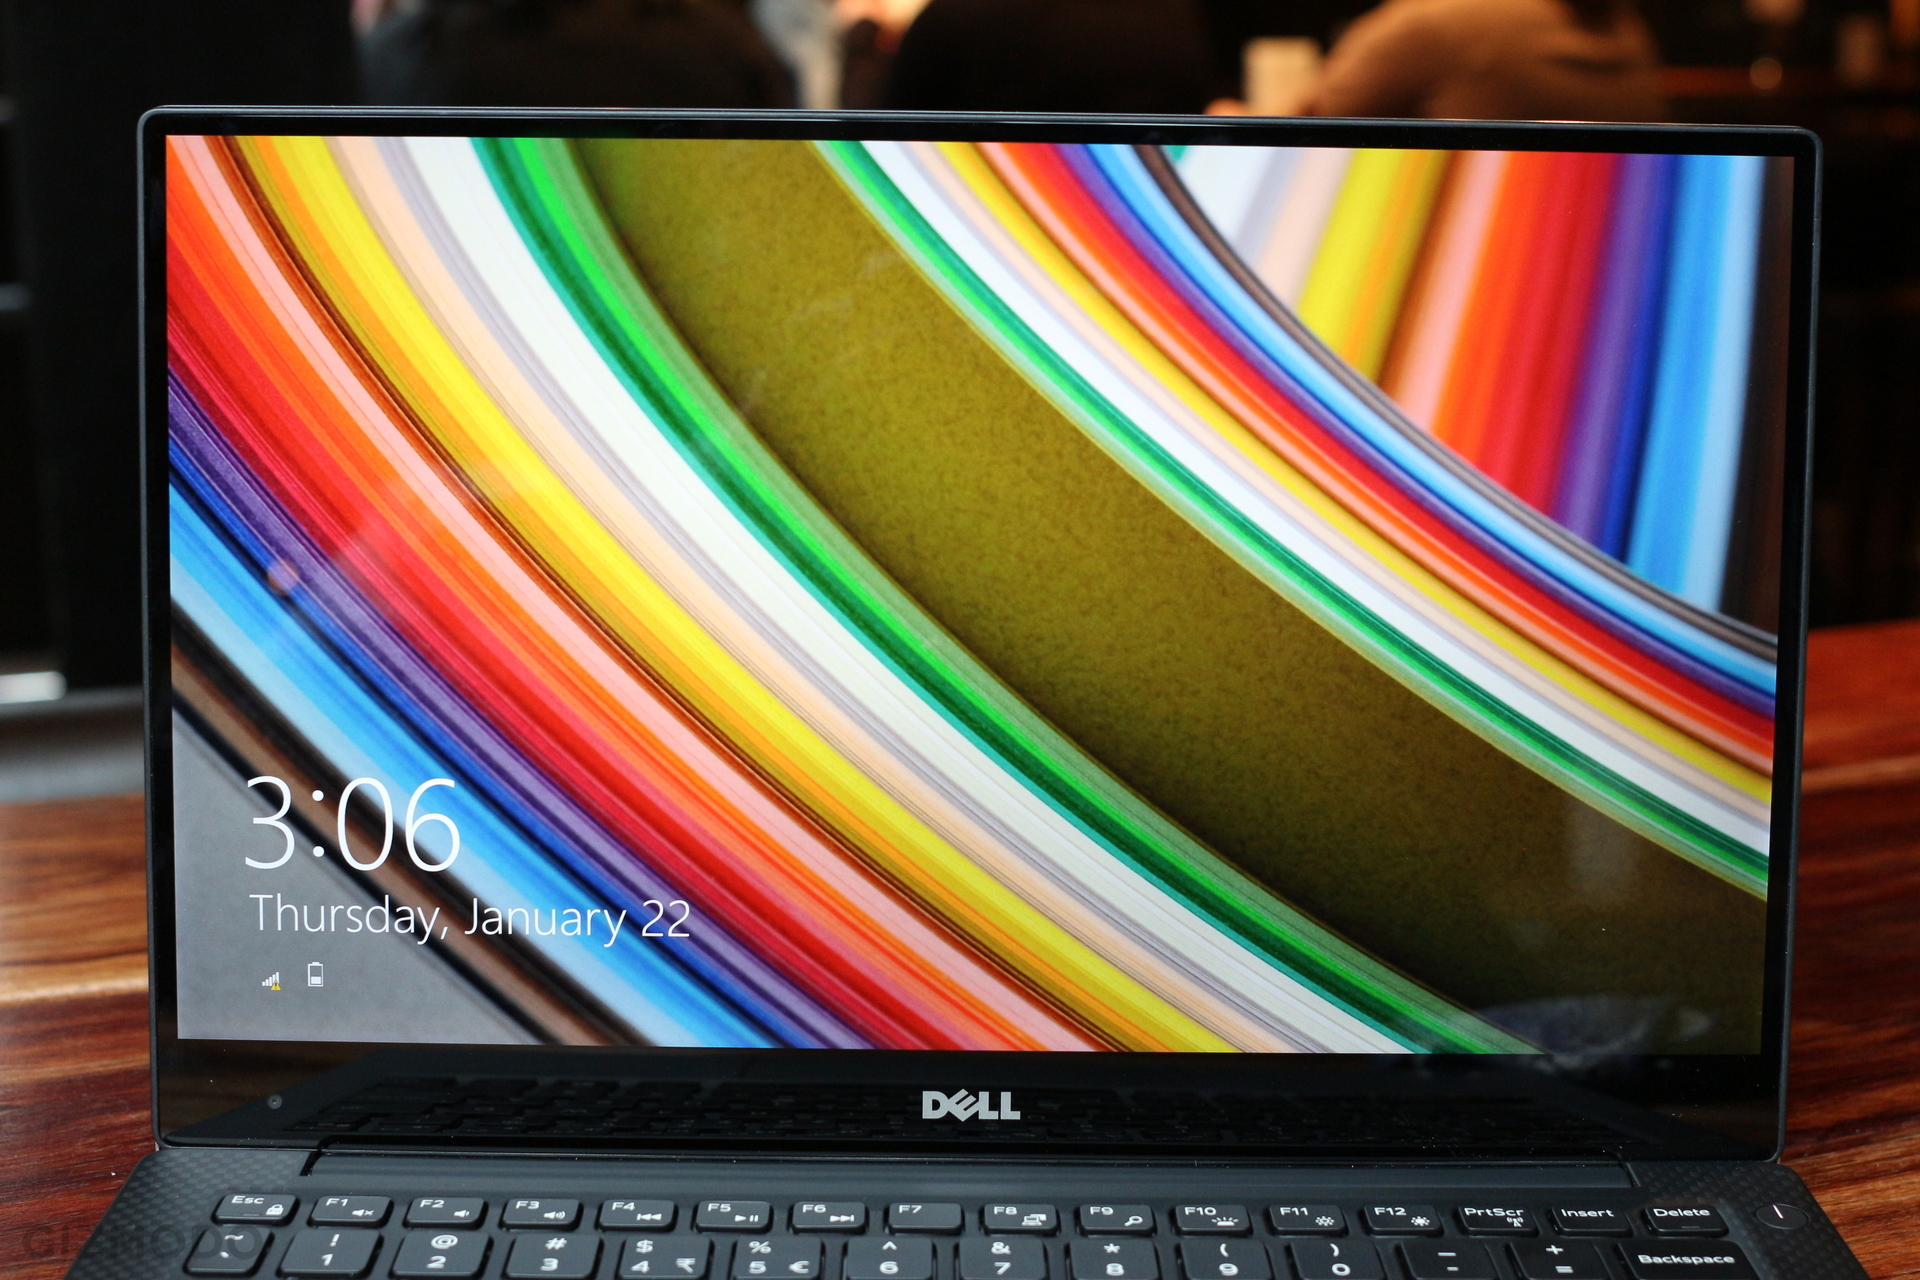 Hands On With The Dell XPS 13 2-in-1